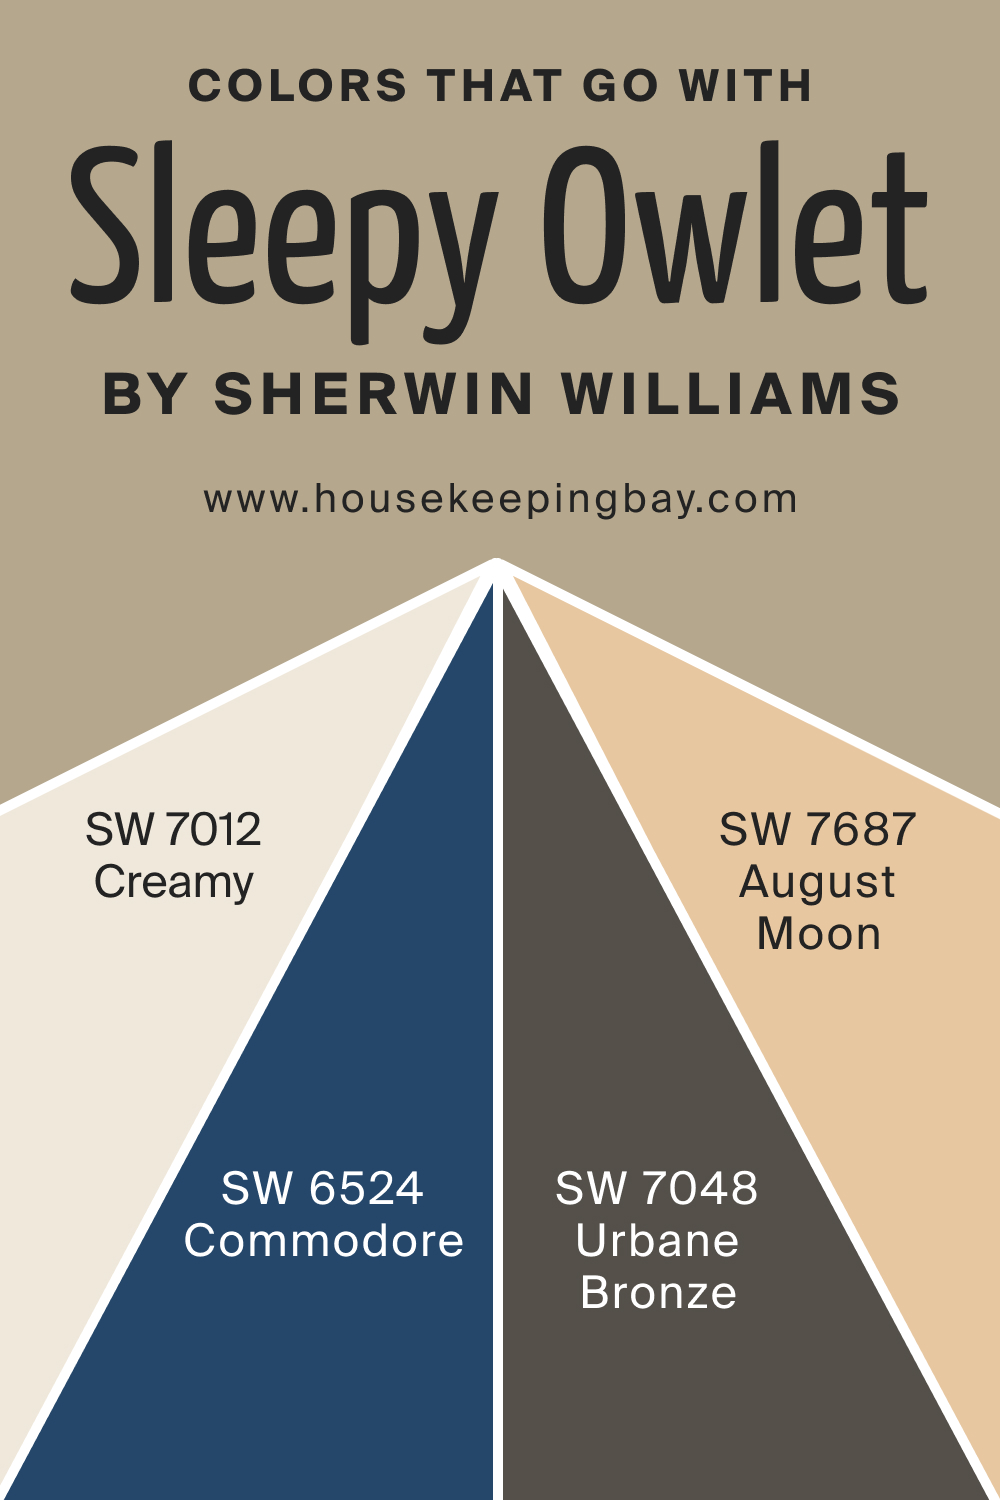 Colors that goes with SW 9513 Sleepy Owlet by Sherwin Williams